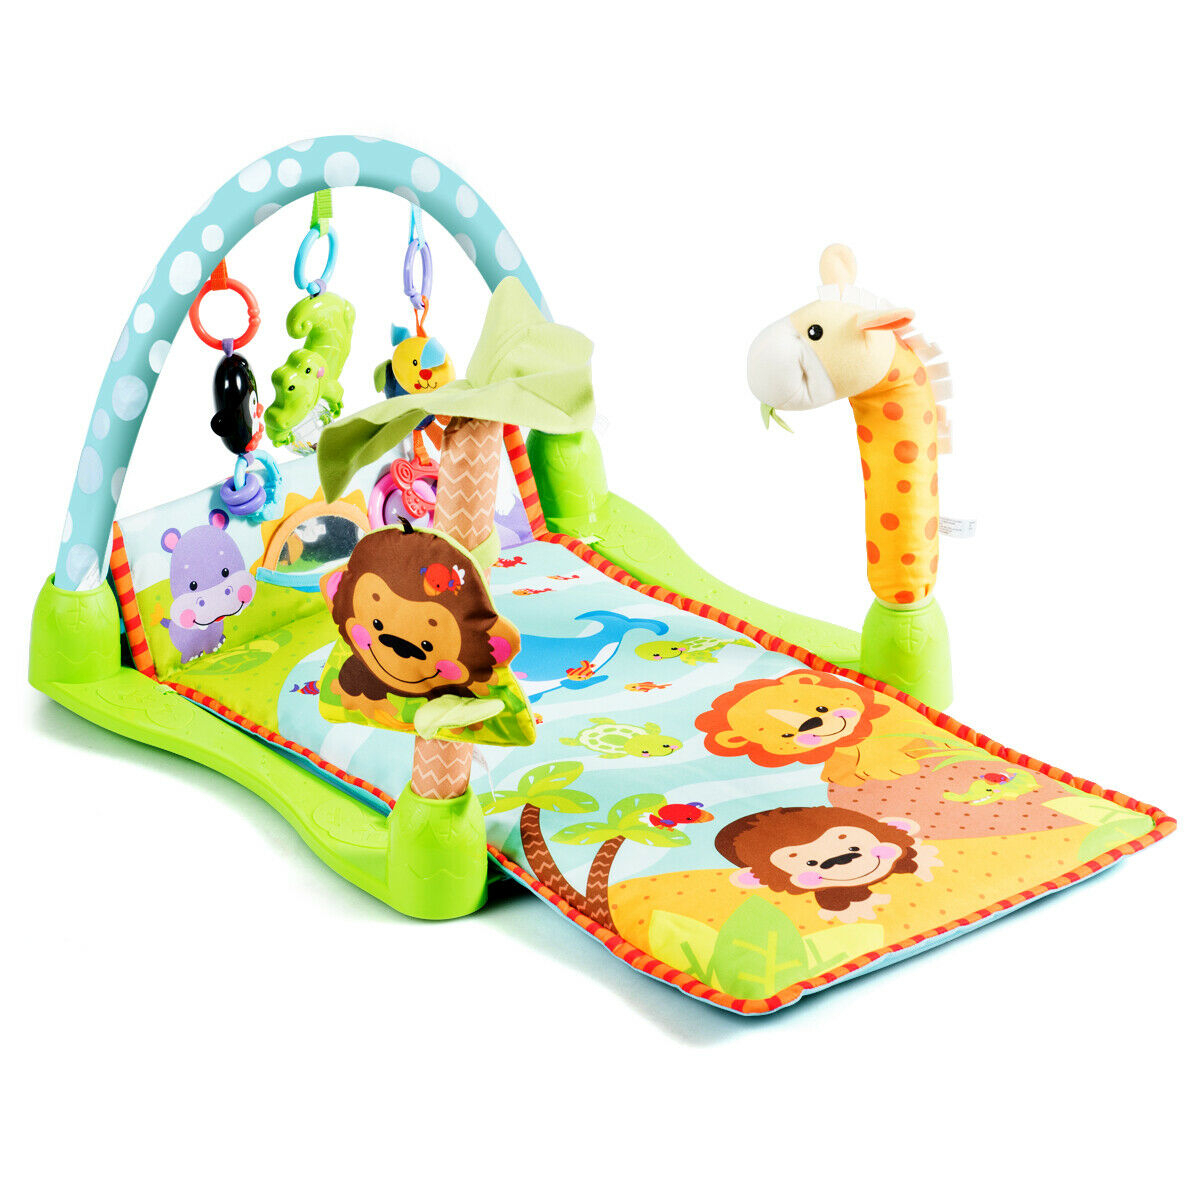 4-in-1 Baby Activity Play Mat Activity Center W/3 Hanging Toys